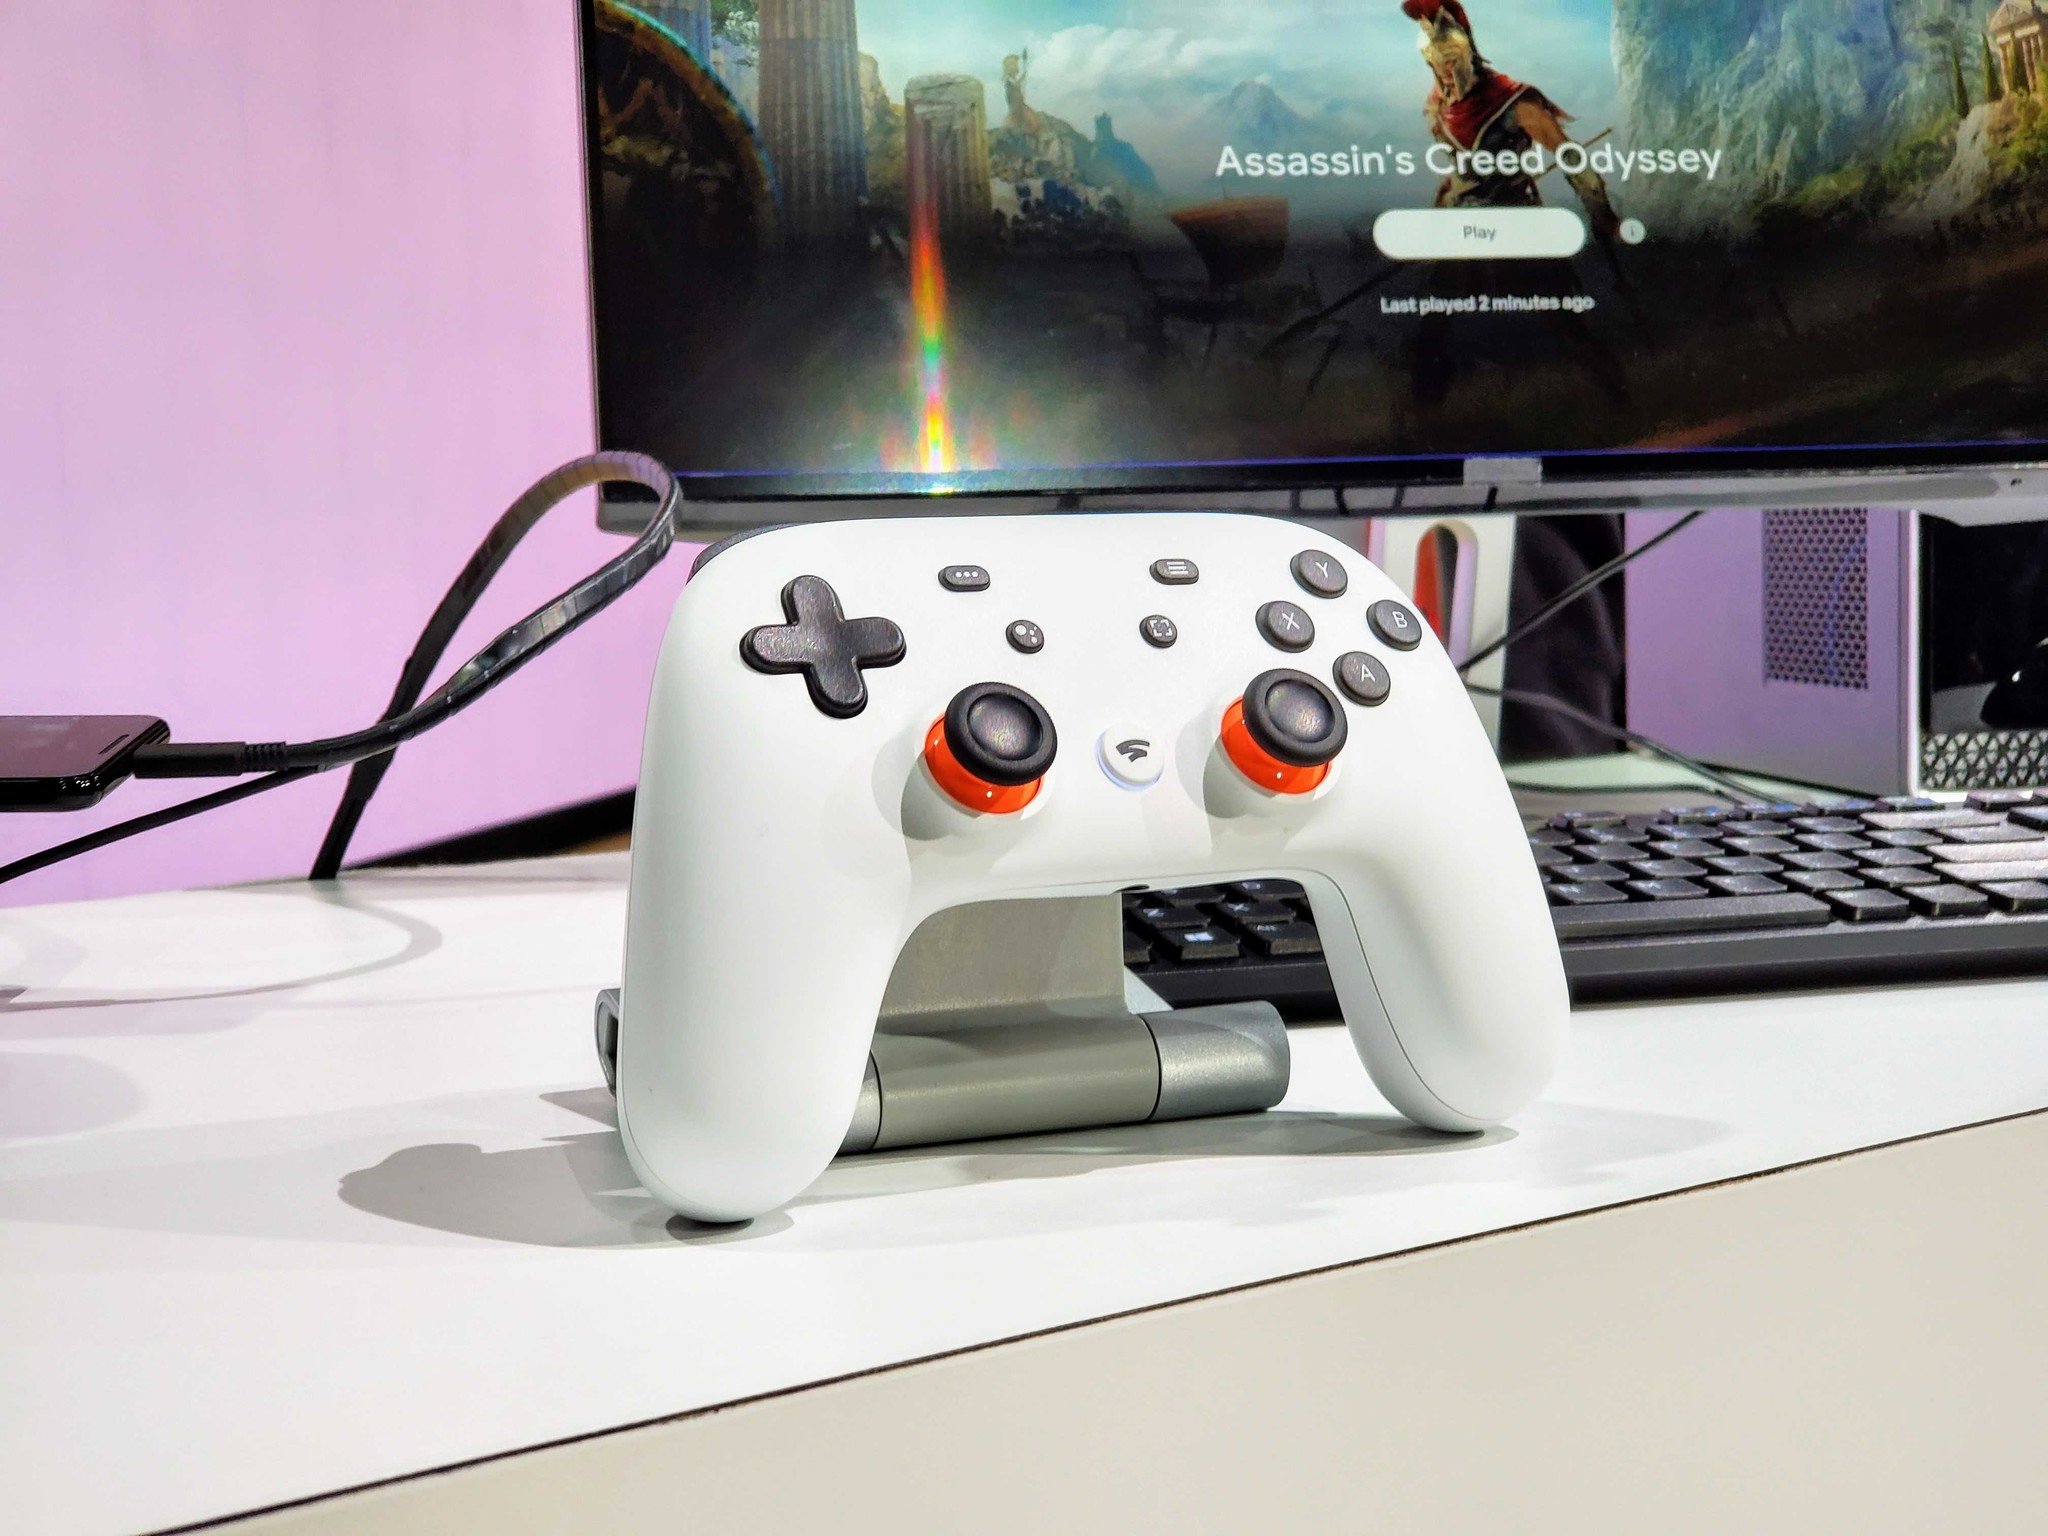 Stadia controller and monitor